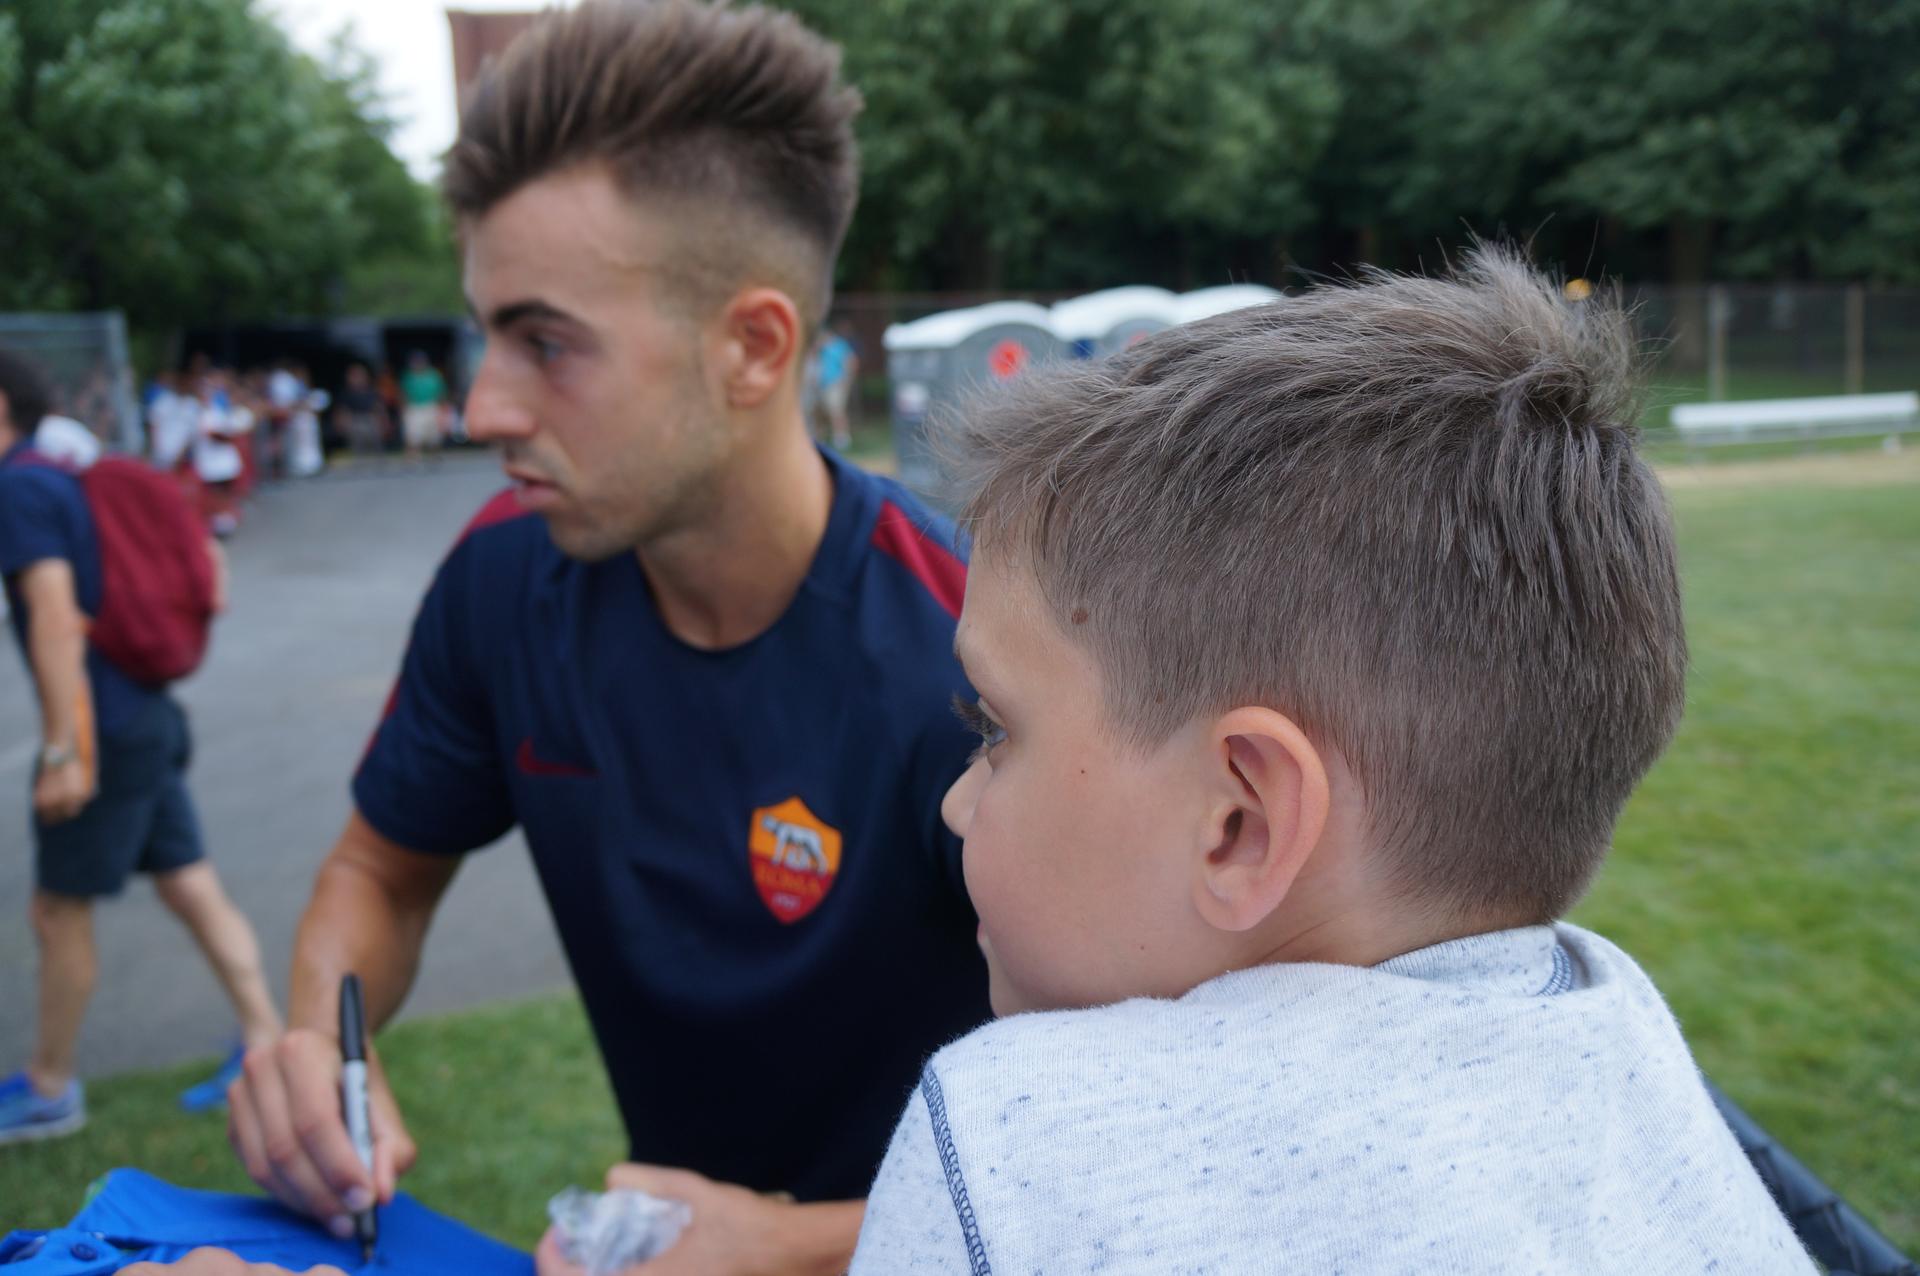 AS Roma’s Stephan El Shaarawy gives out signatures and poses for photos as a young fan looks on. This boy called out to El Shaarawy yelling ‘El!’ El!’ at the top of his lungs. After he got his signature he was very hapy.